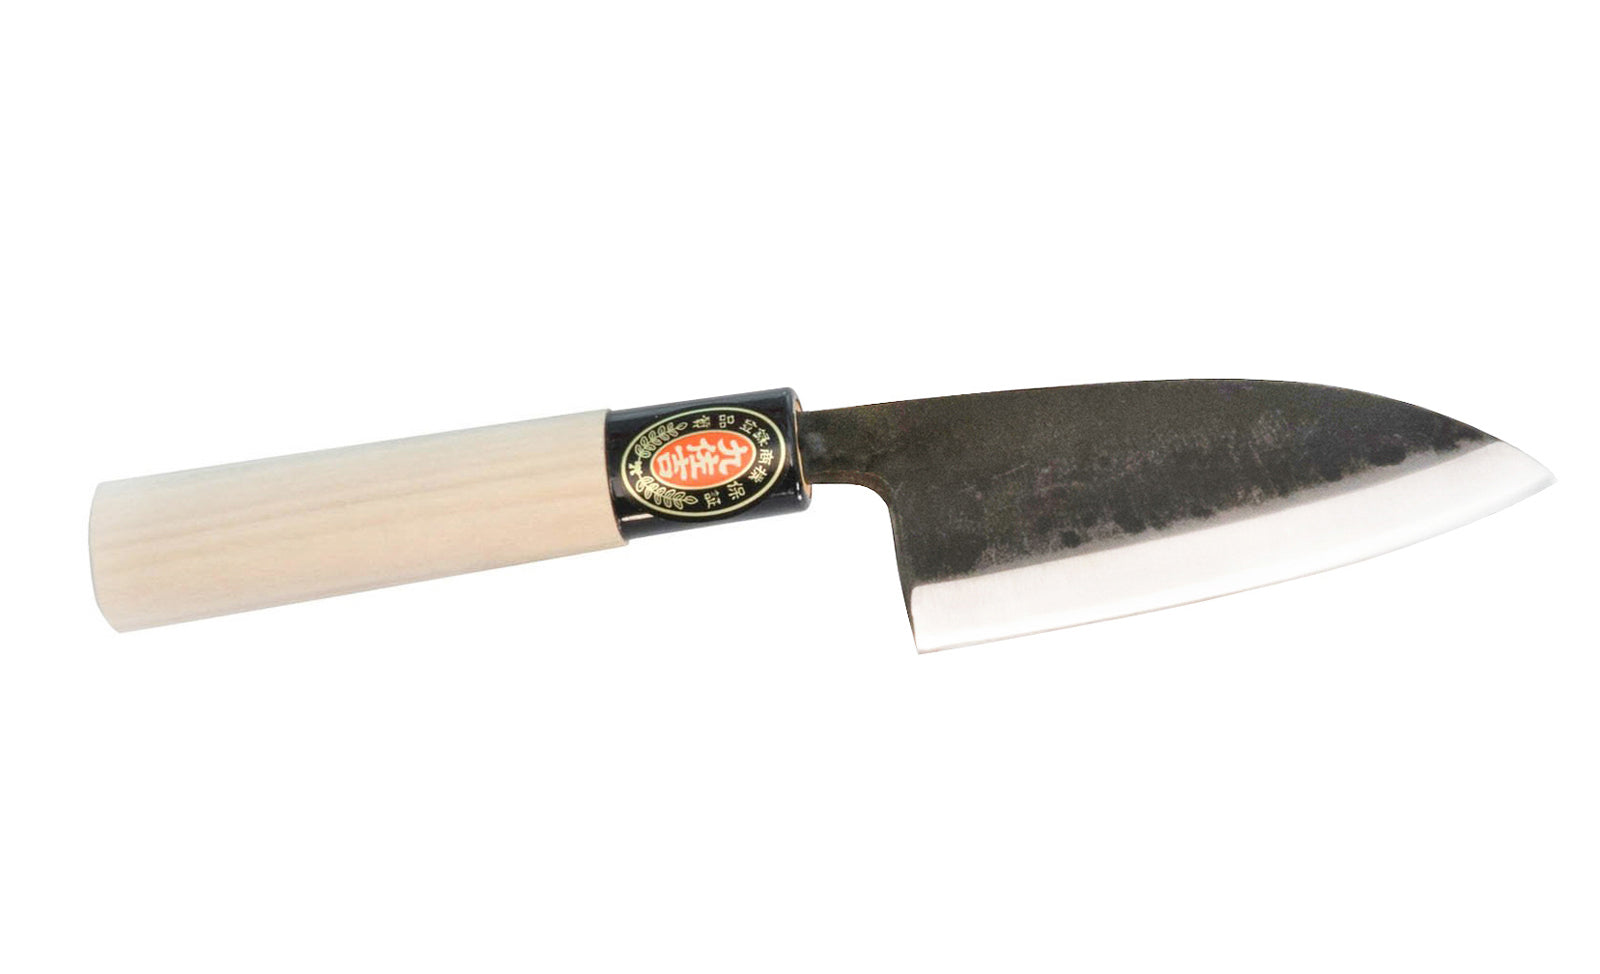 Yoshida Hamono Japanese Kyusakichi "Deba Hocho" Laminated Knife is a heavy duty & thick shorter kitchen knife. 4" (105 mm) long cutting edge blade is suitable for meat slicing. Laminated with high carbon & mild steel. 105 mm short blade. Wooden Handle. Made in Japan. Model 6251. 4951572006258. Kusakichi Kitchen Knife